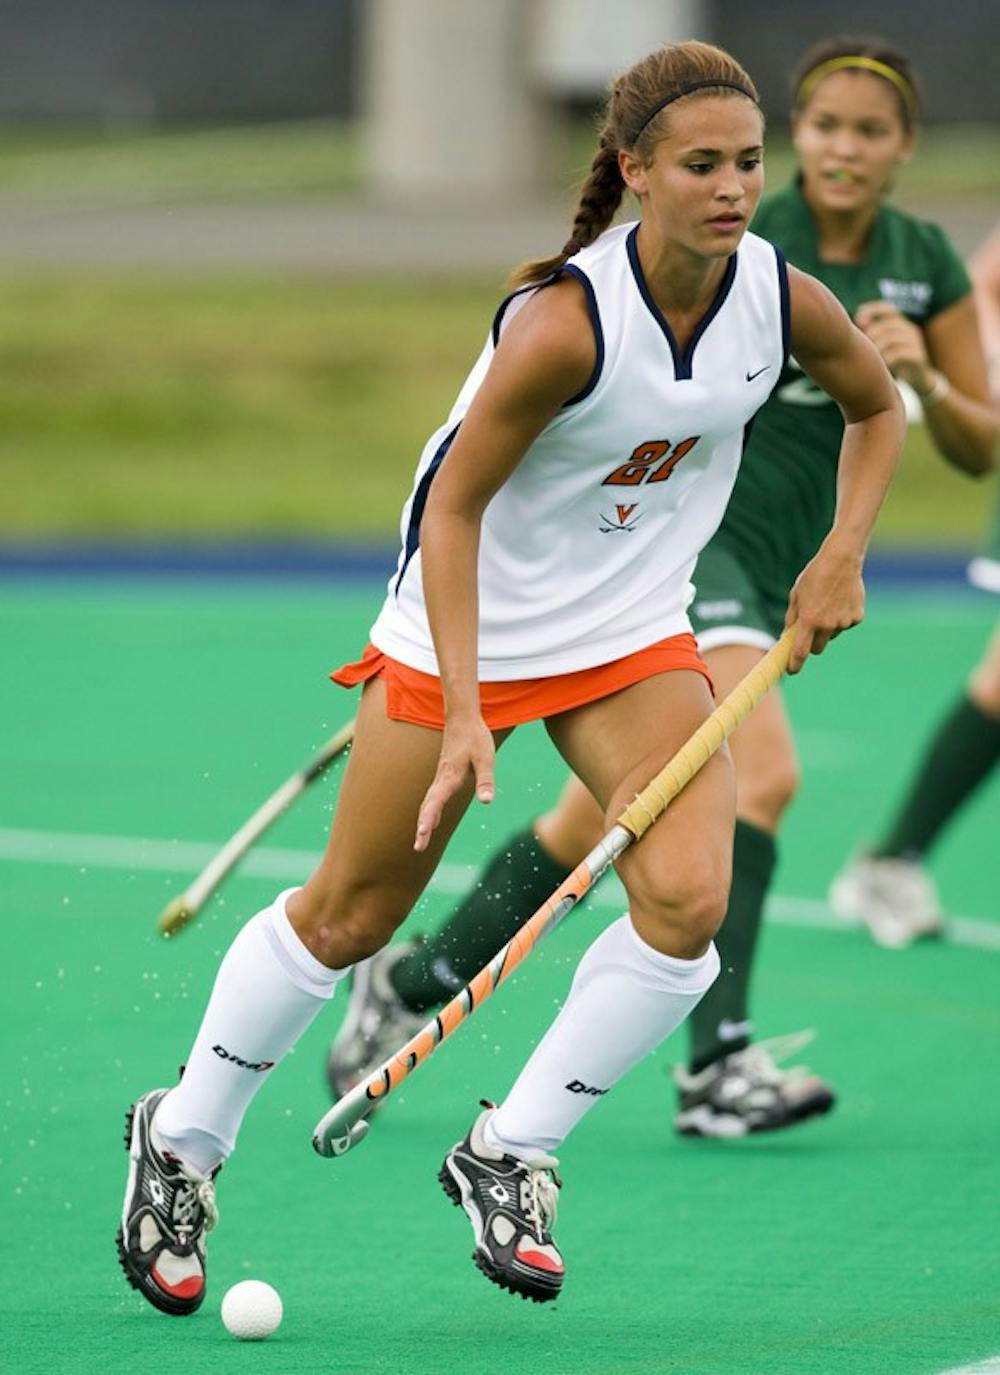 August 29, 2008 - CHARLOTTESVILLE, VA -  Virginia Cavaliers midfielder Paige Selenski (21) in action against W&M.  The Virginia Cavaliers field hockey team defeated the William and Mary Tribe 5-0 on the University Hall Turf Field on the Grounds of the University of Virginia in Charlottesville, VA.